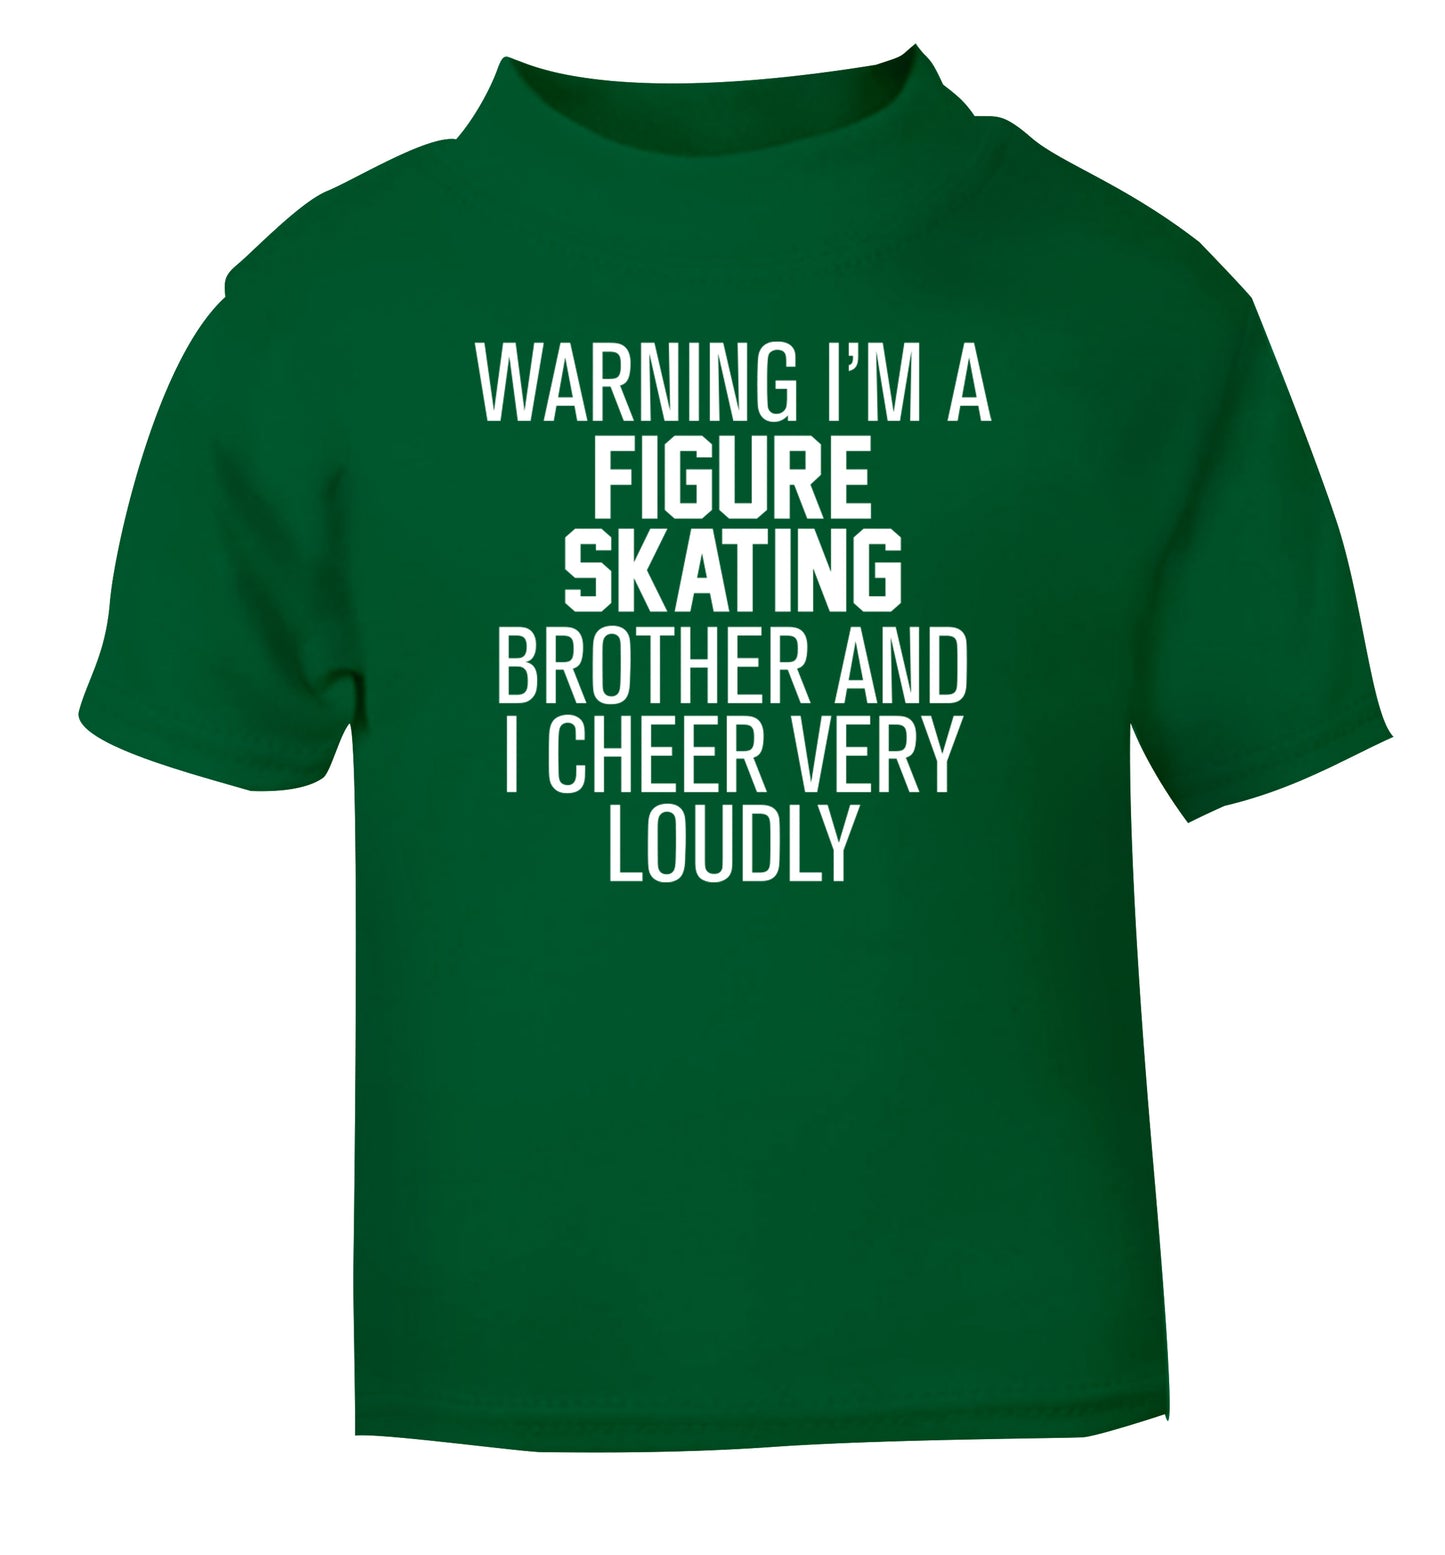 Warning I'm a figure skating brother and I cheer very loudly green Baby Toddler Tshirt 2 Years